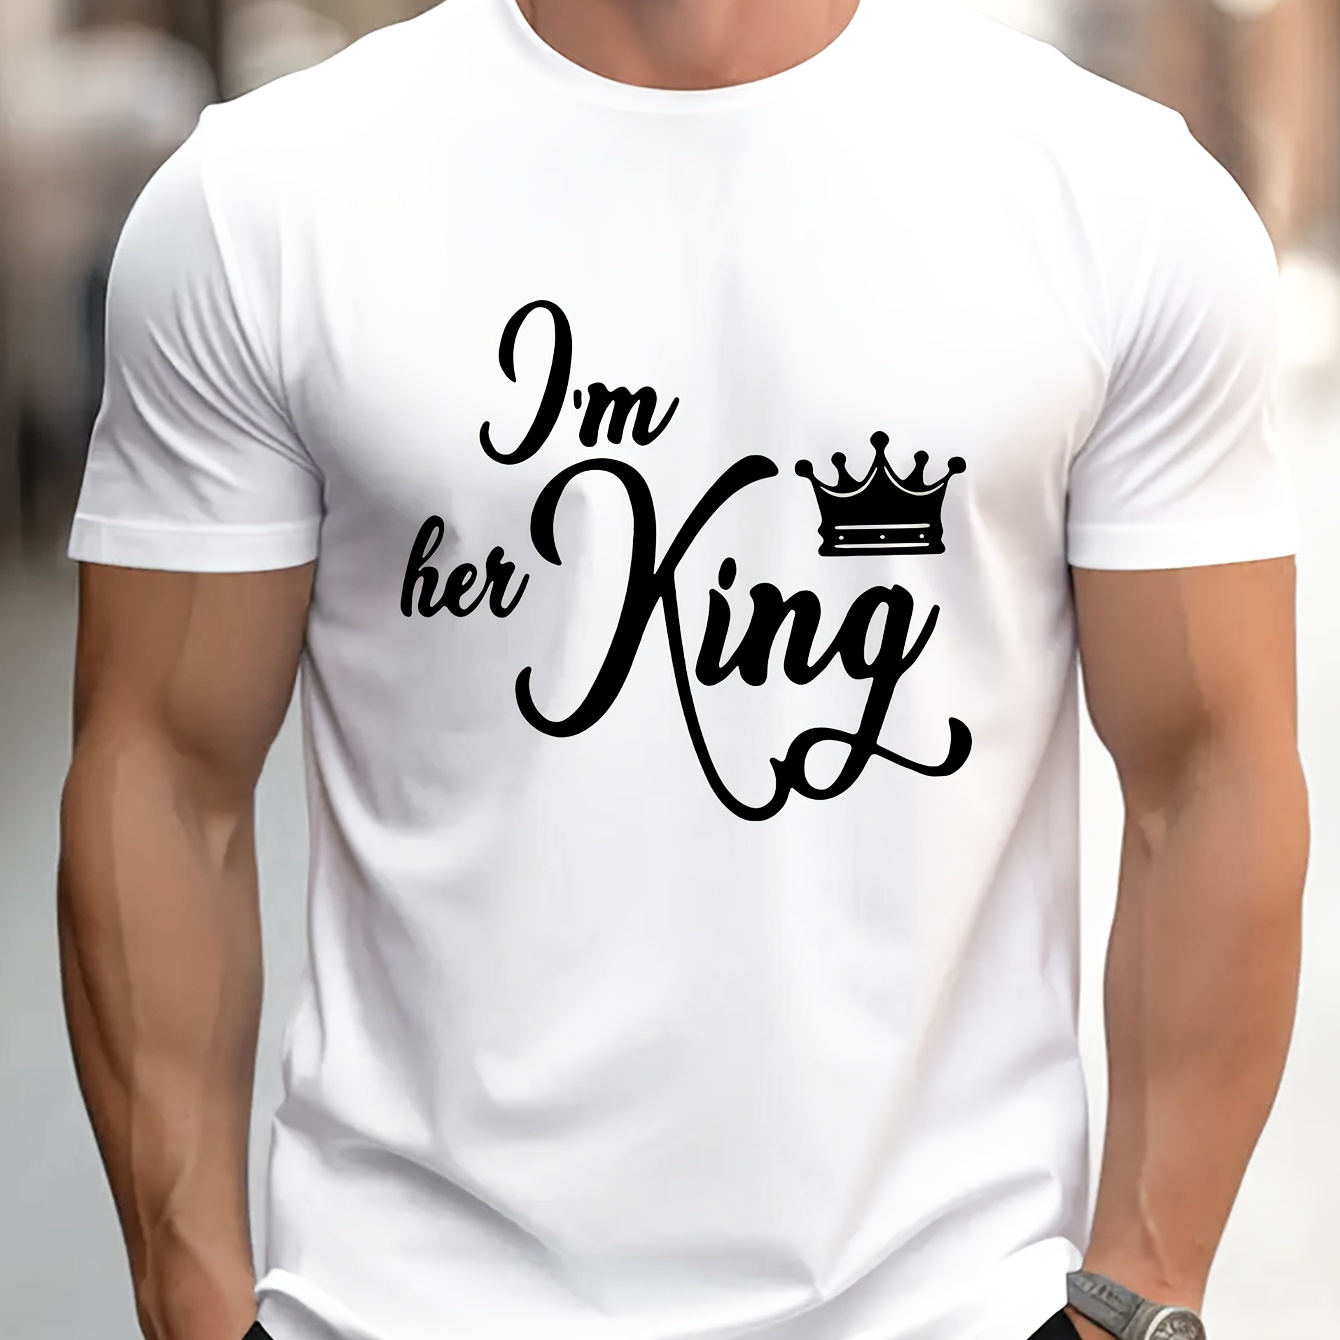 

I'm King "trendy Print Casual Short-sleeved Cotton T-shirt For Men, Spring And Summer Top, Comfortable Round Neck Tee, Regular Fit, Versatile Fashion For Everyday Wear